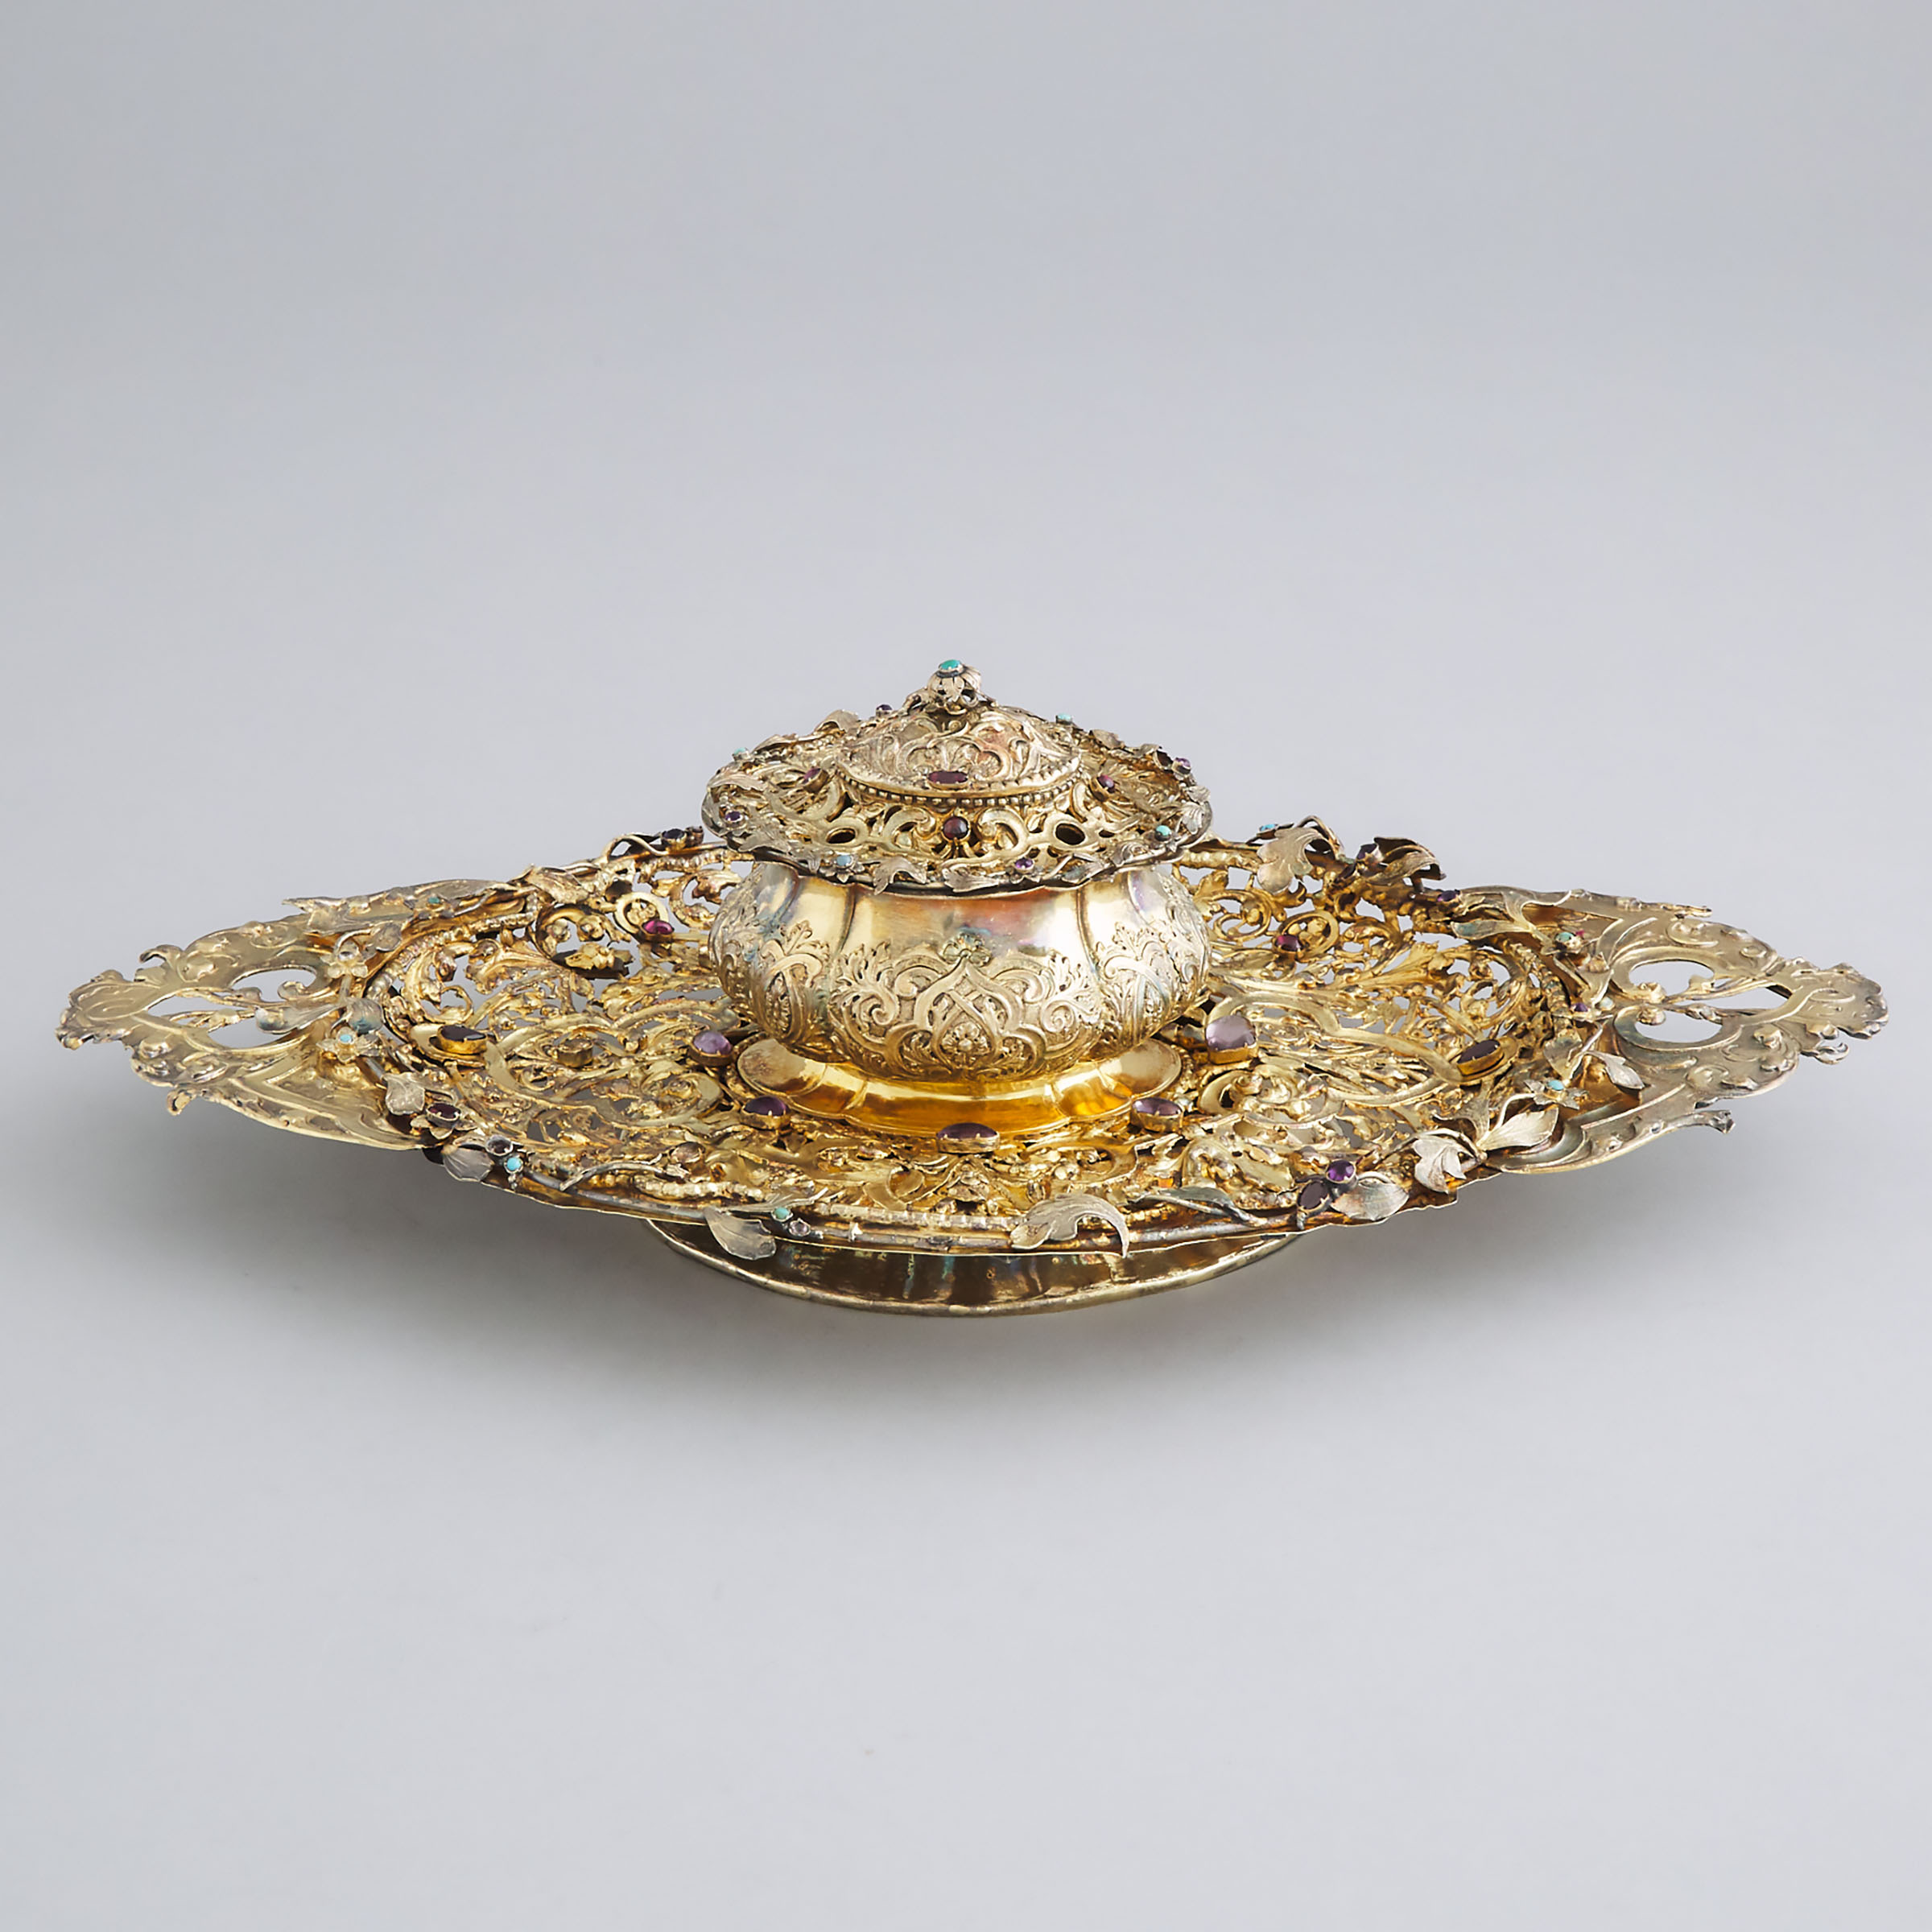 Continental Assembled 'Jewelled' Silver-Gilt Inkstand, probably German, 19th century